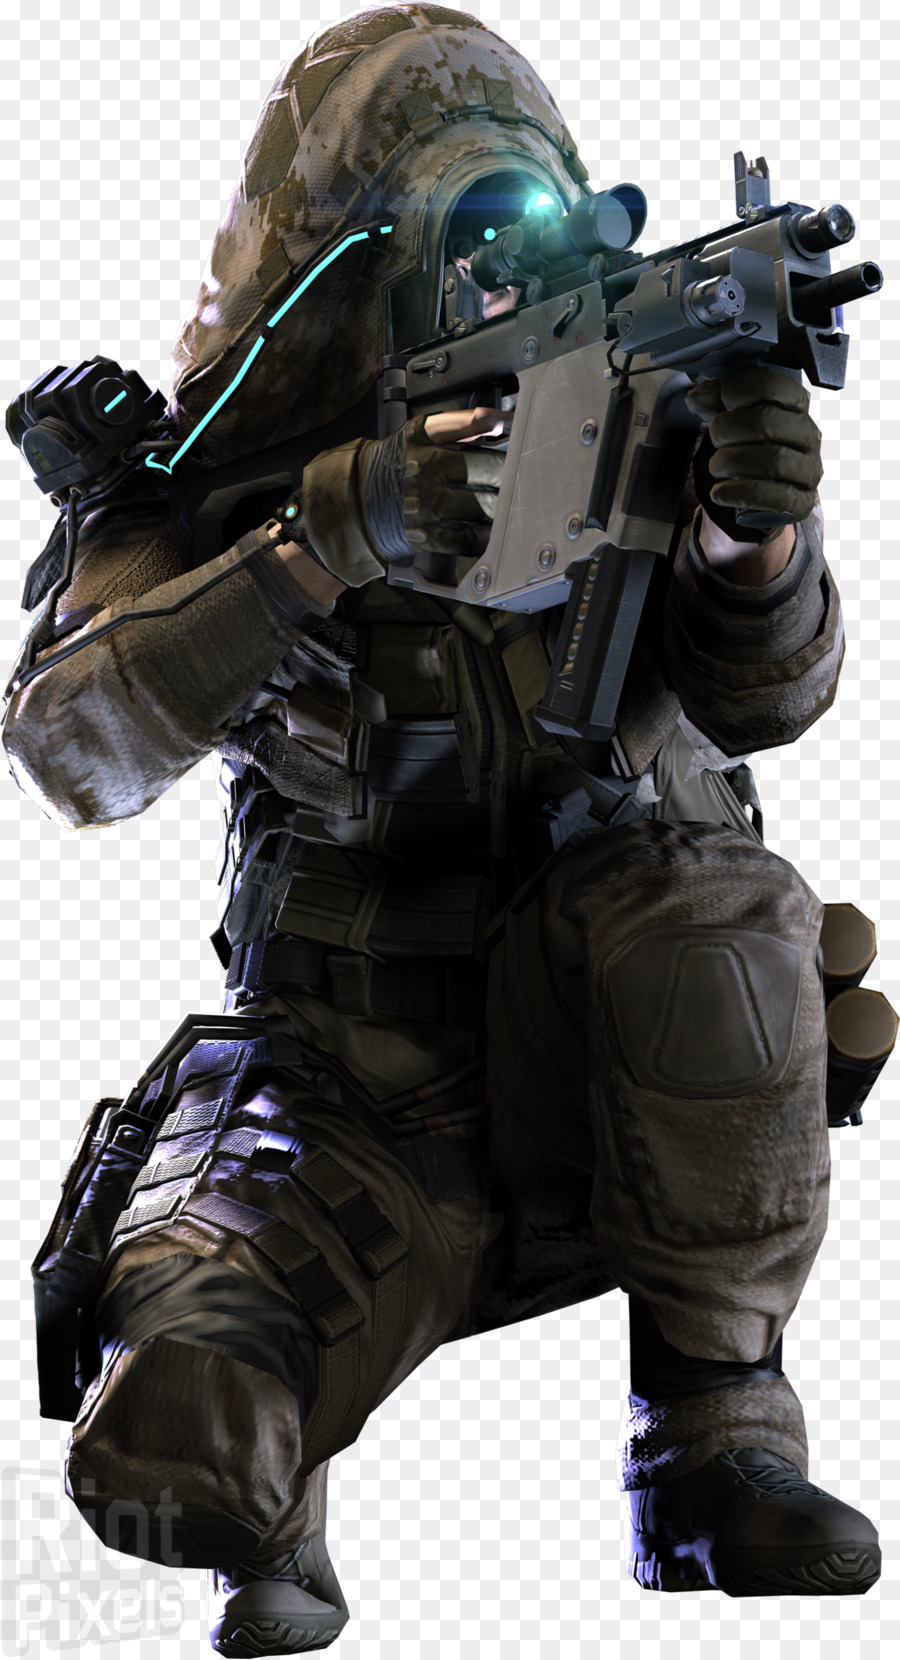 Tom Clancys Ghost Recon PNG - 171278